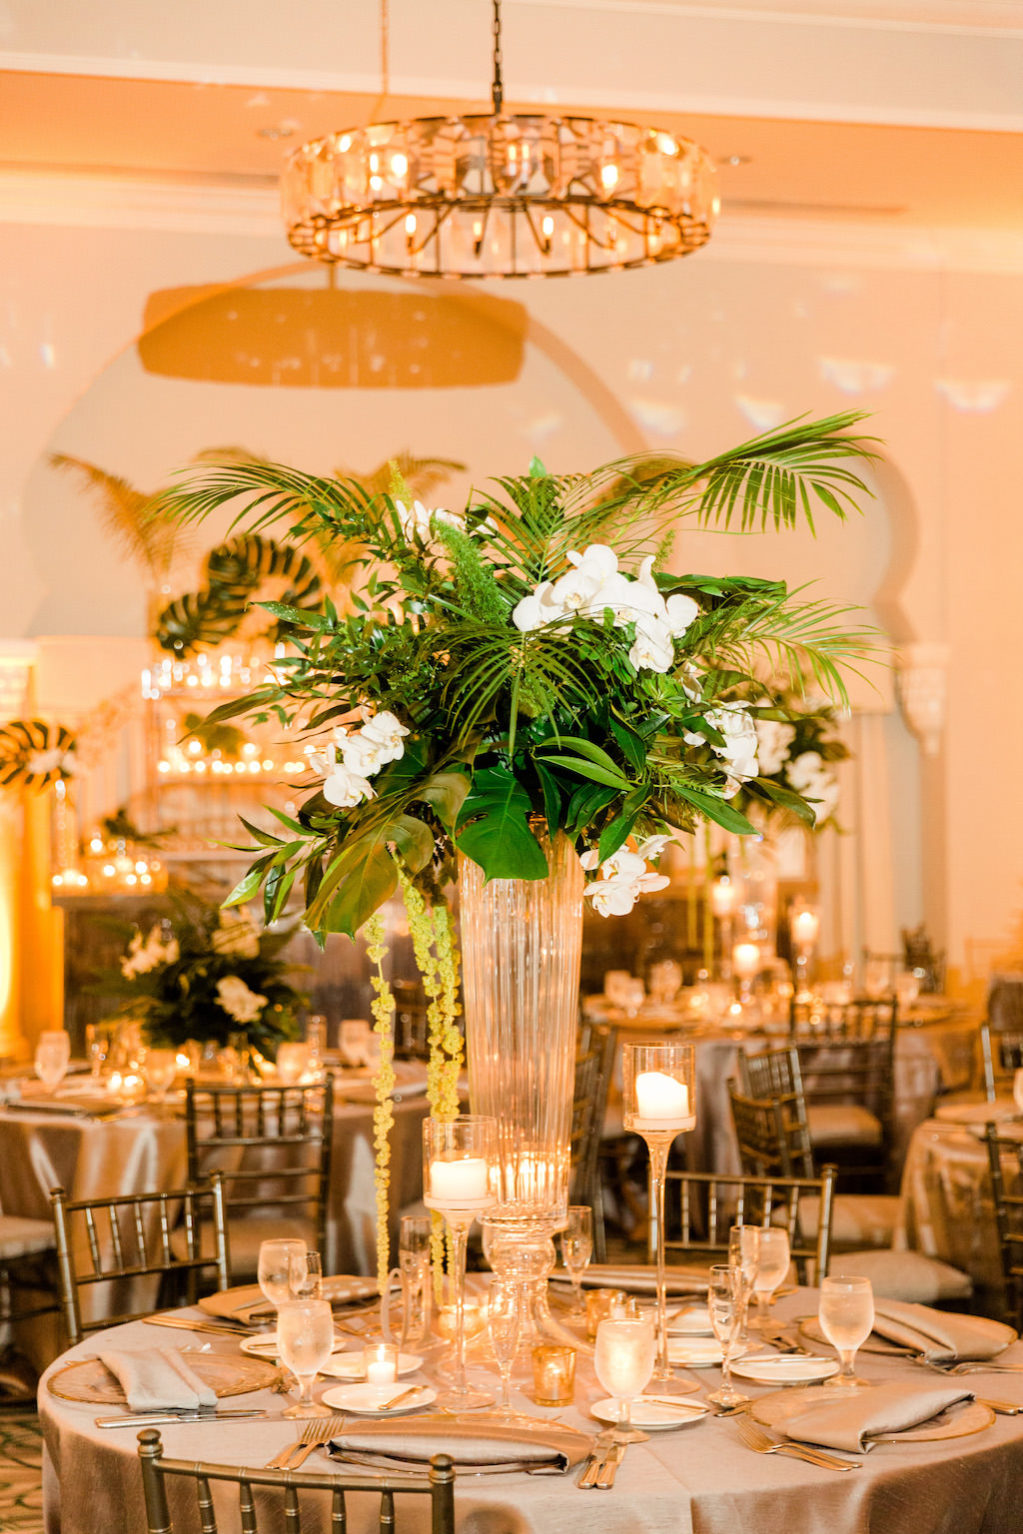 Tropical Inspired, Modern Wedding Reception Decor, Tall Centerpieces with Green Monstera Leaves, Large Palm Fronds, White Orchid Florals, Hanging Green Amaranthus, Round Tables with Silver Linens, Chiavari Chairs, Grand Ballroom of The Vinoy Renaissance St. Petersburg Resort & Golf Club | Over the Top Rental Linens | Tampa Bay Florist Bruce Wayne Florals | Florida Luxury Wedding Planner Parties A'La Carte